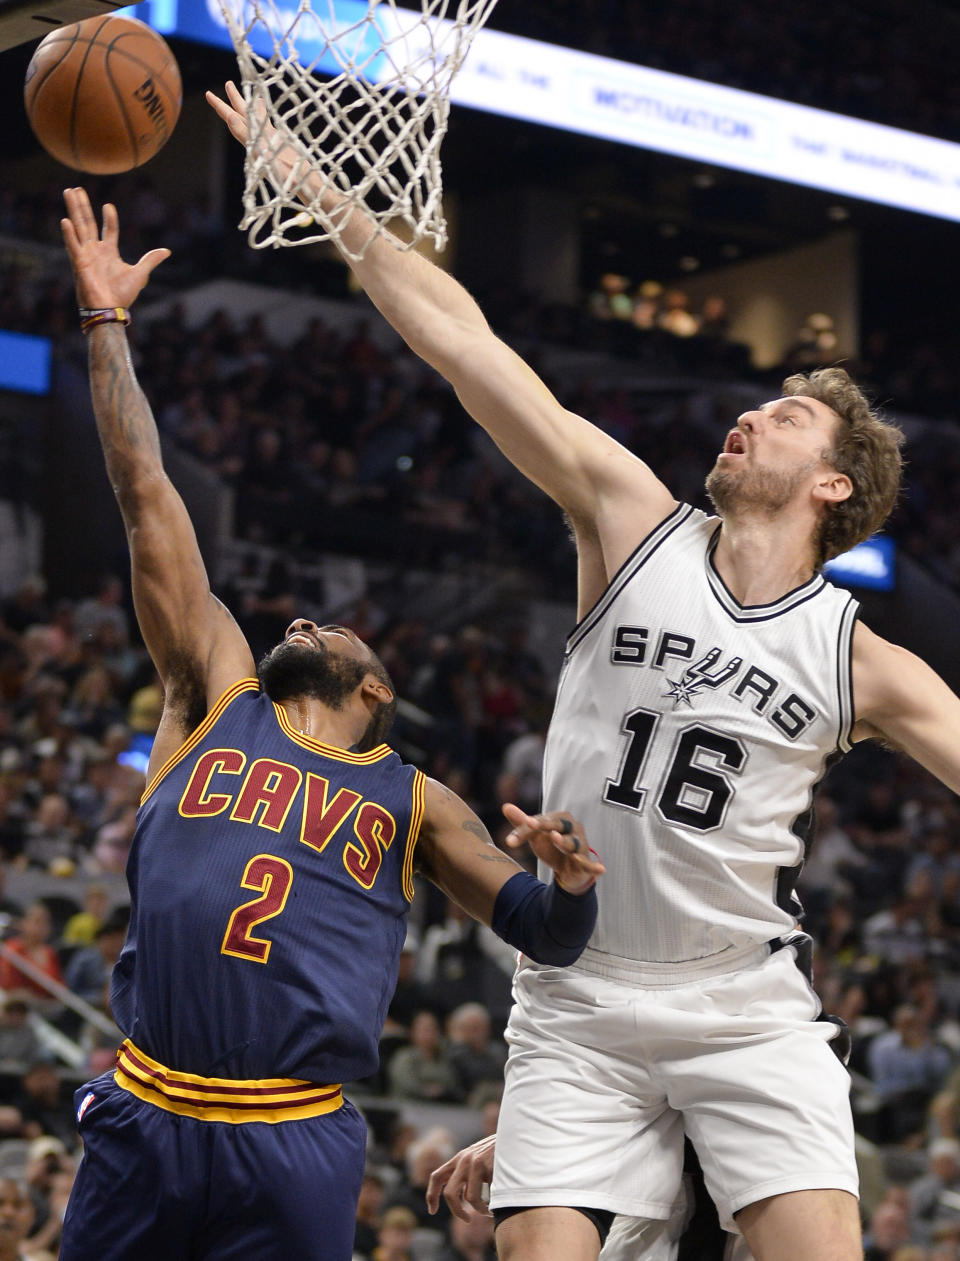 Cleveland Cavaliers guard Kyrie Irving (2) shoots against San Antonio Spurs center Pau Gasol, of Spain, during the first half of an NBA basketball game, Monday, March 27, 2017, in San Antonio. (AP Photo/Darren Abate)